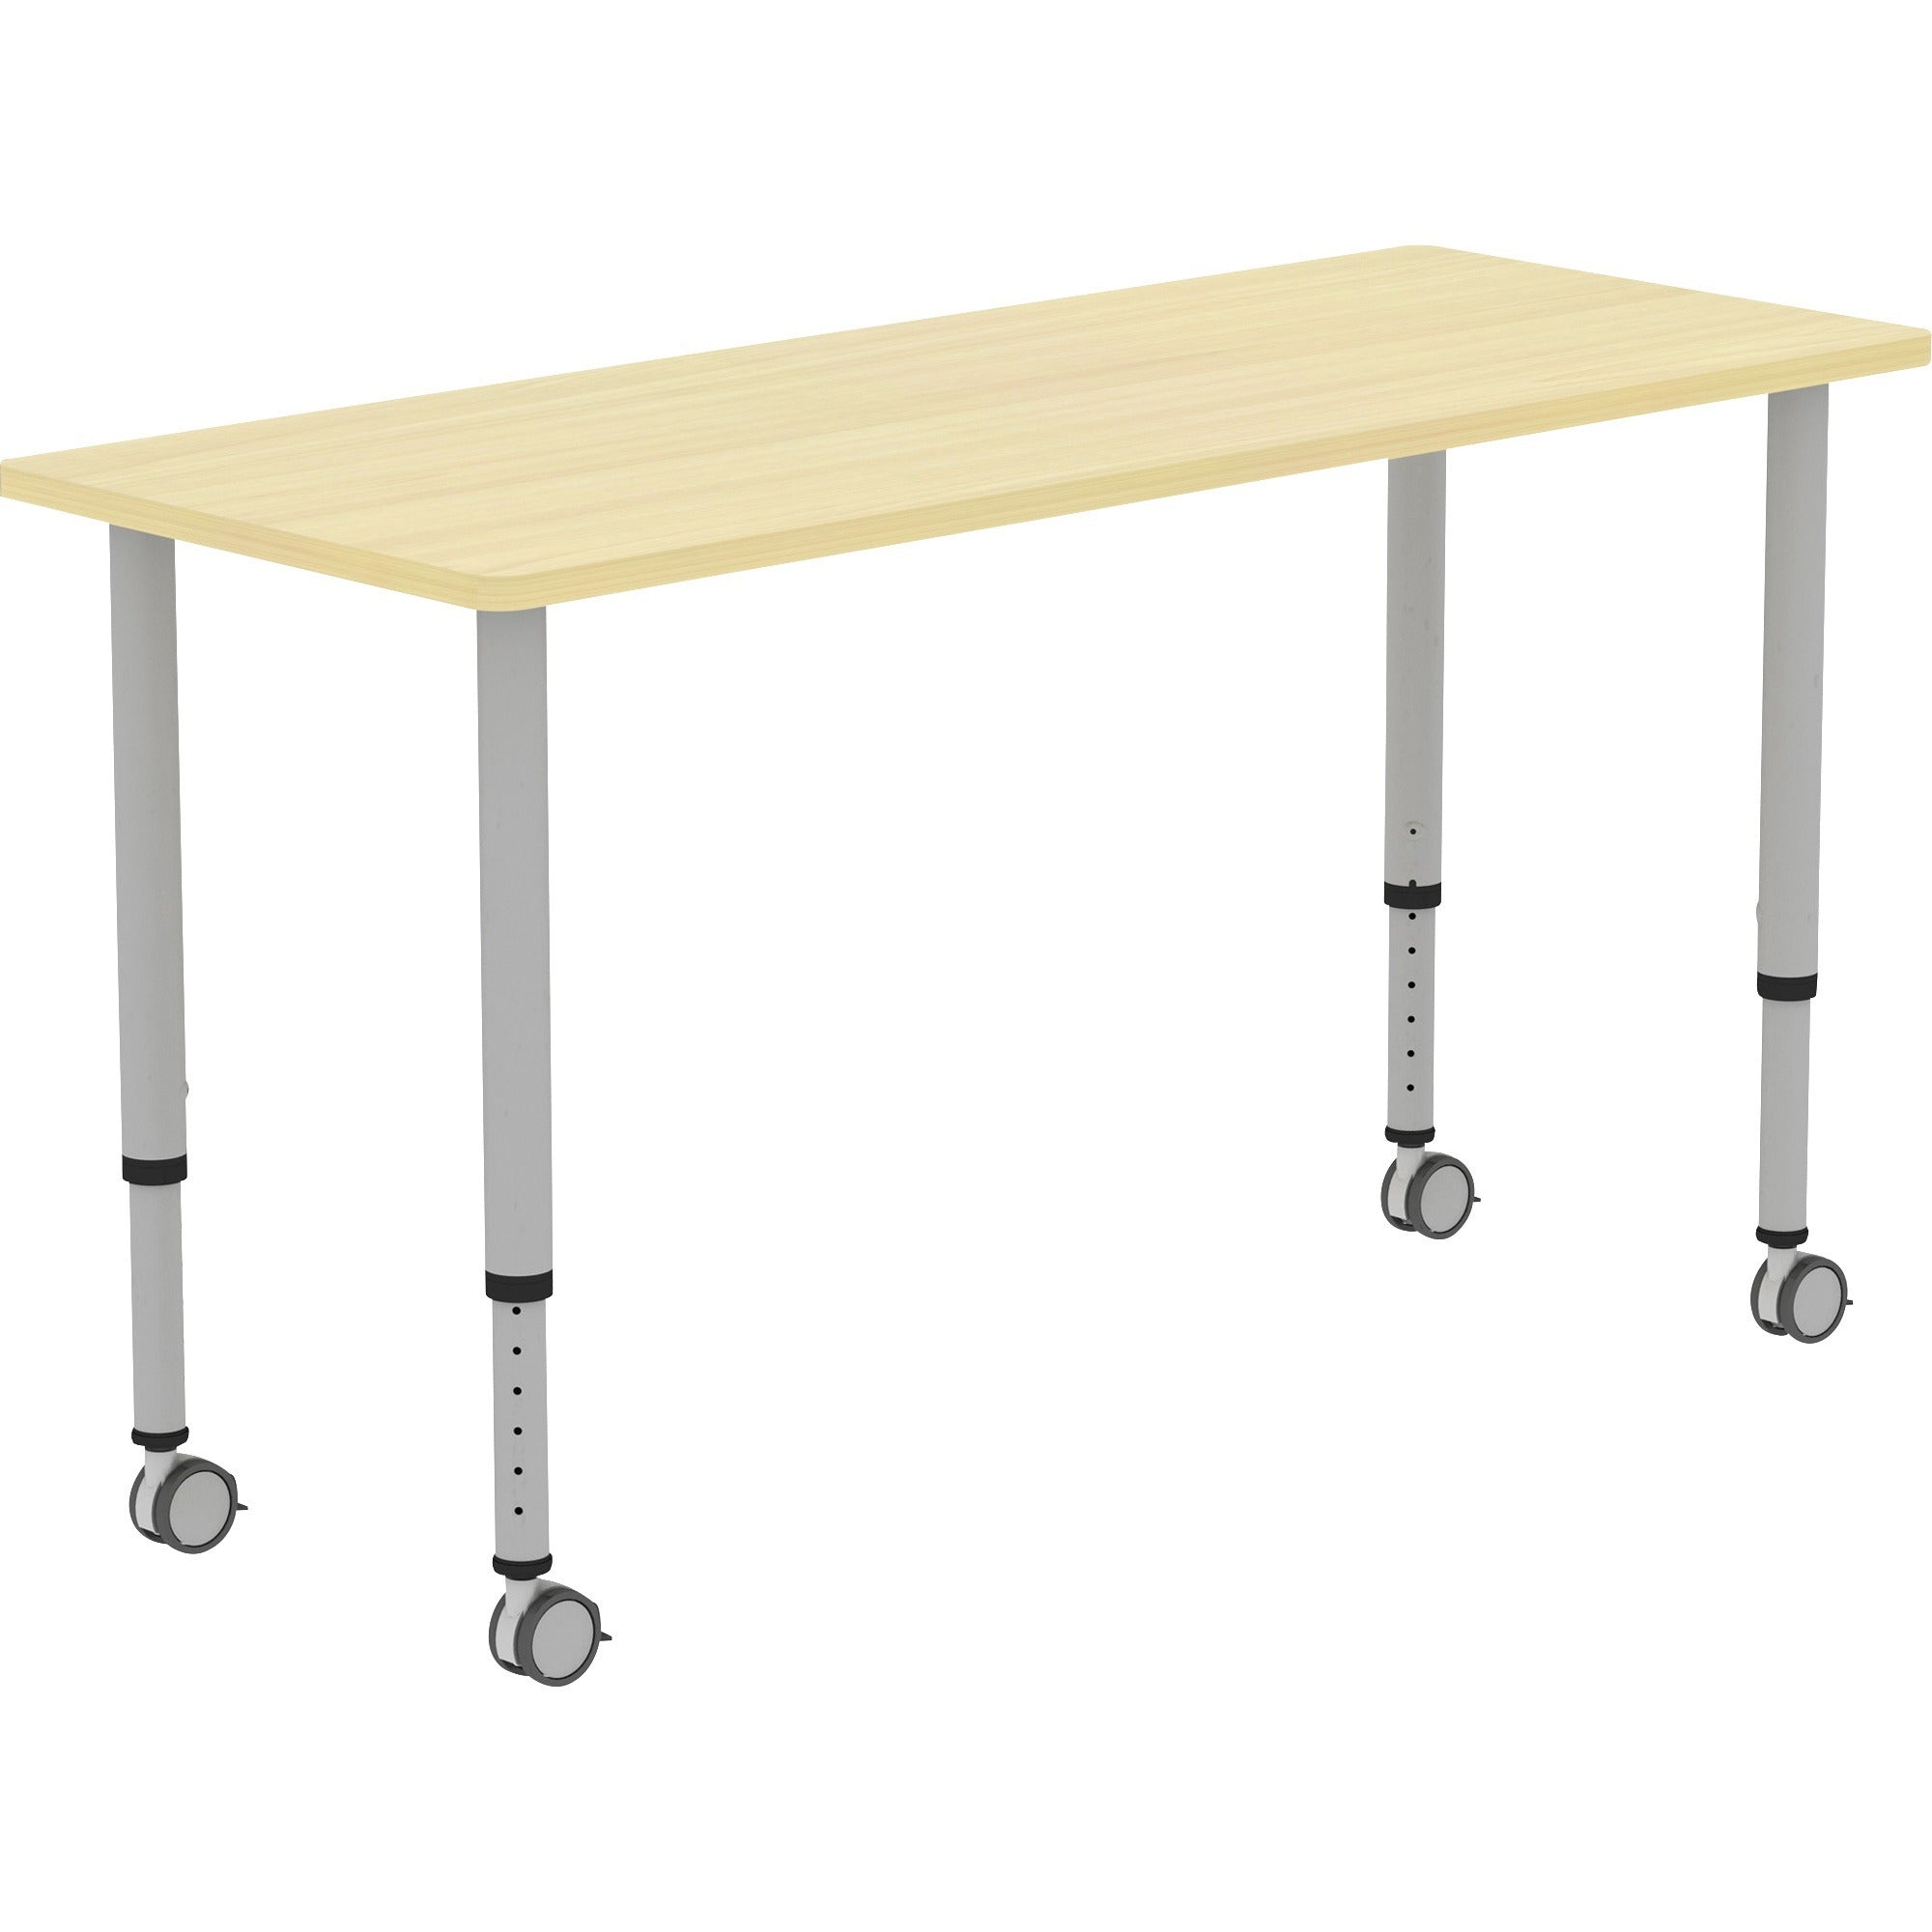 lorell-attune-height-adjustable-multipurpose-rectangular-table-for-table-toprectangle-top-adjustable-height-2662-to-3362-adjustment-x-60-table-top-width-x-2362-table-top-depth-3362-height-assembly-required-laminated-maple-la_llr69580 - 1